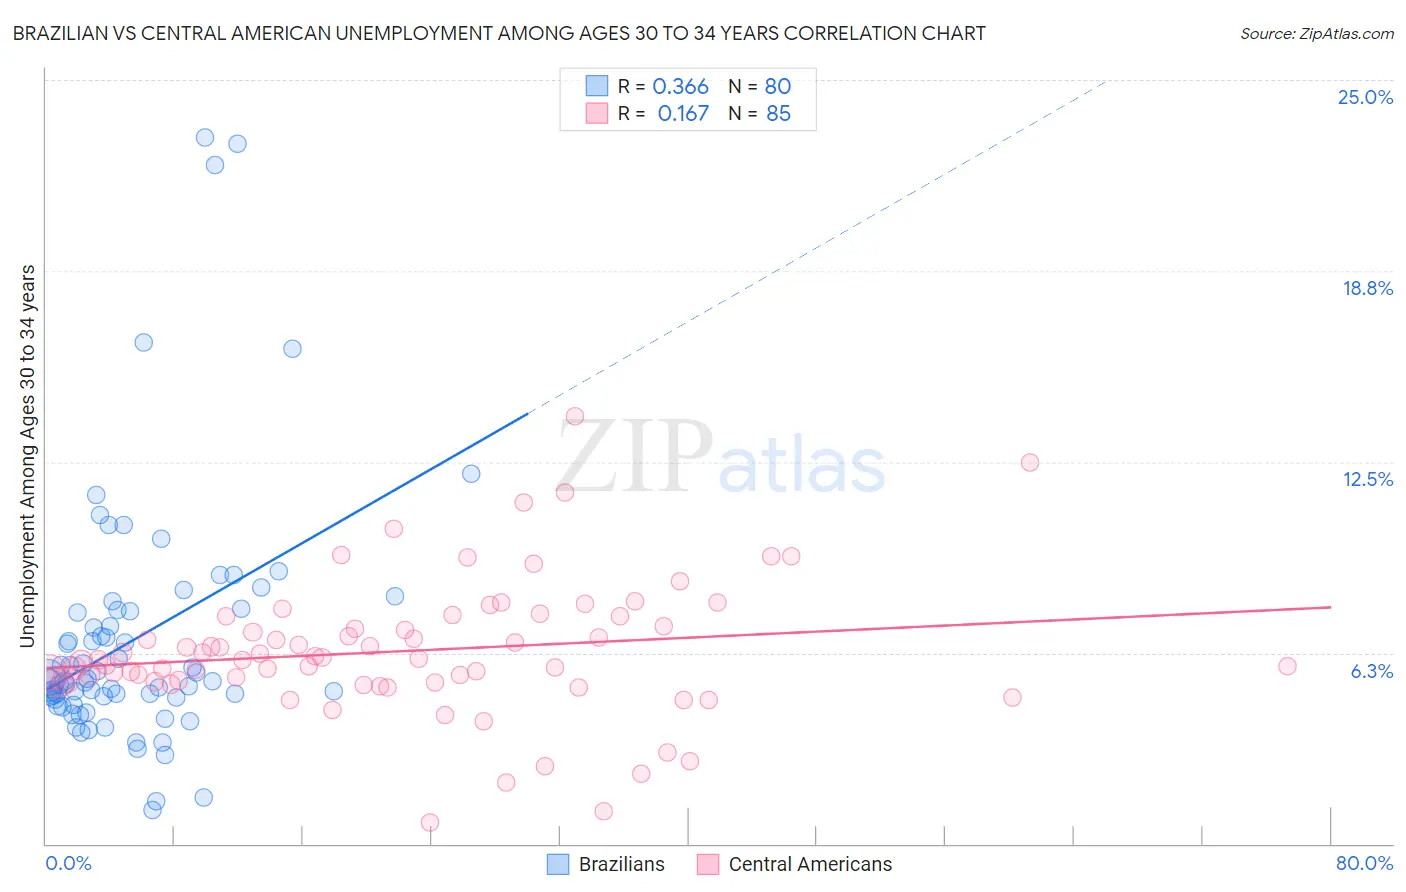 Brazilian vs Central American Unemployment Among Ages 30 to 34 years